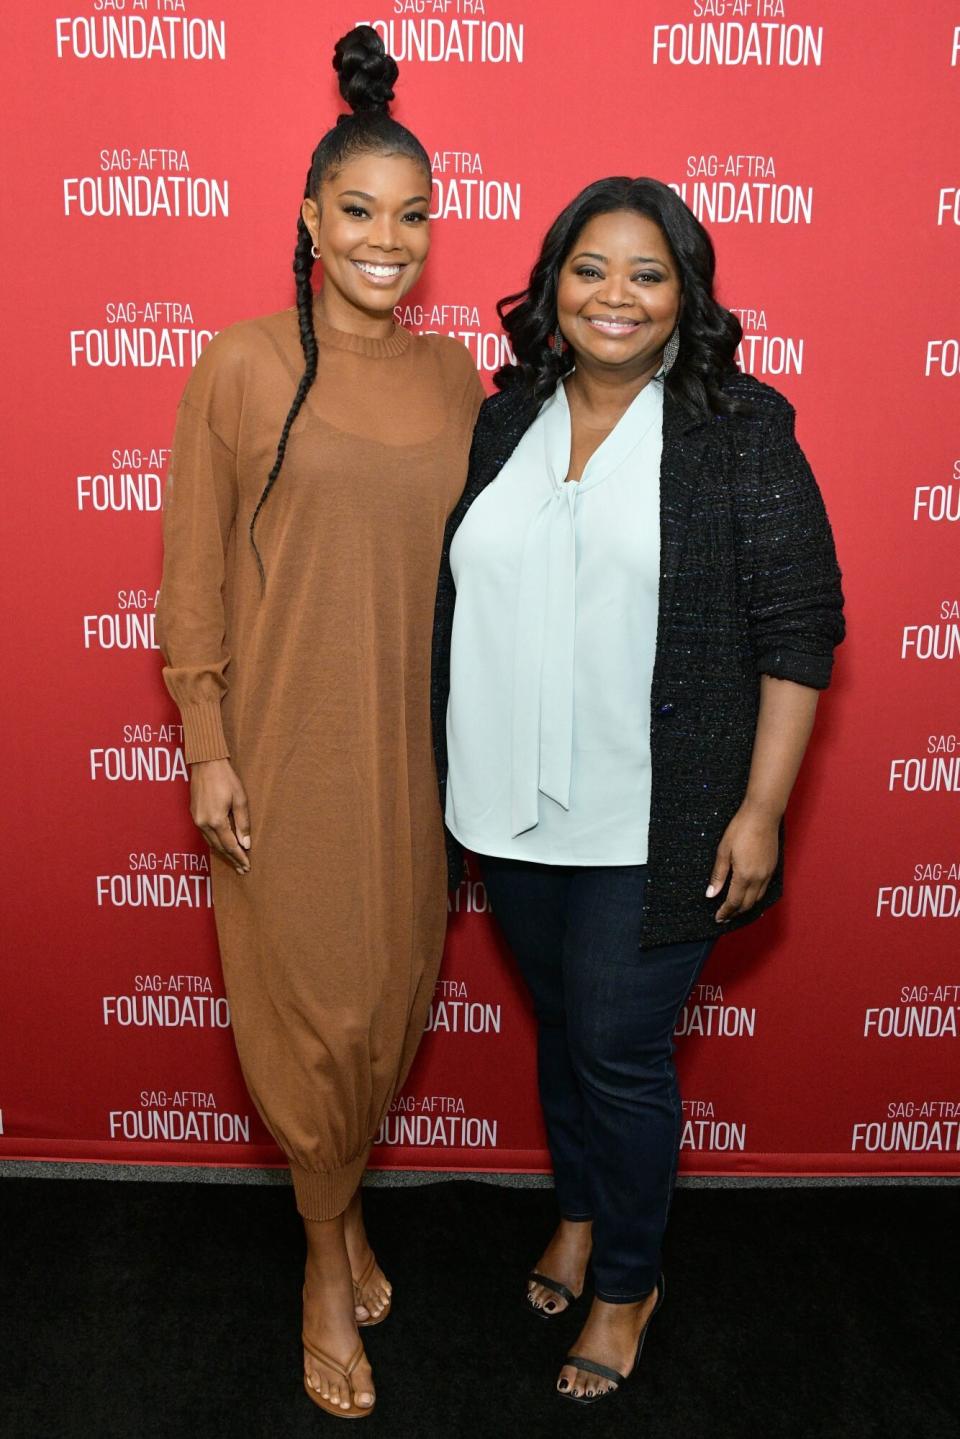 LOS ANGELES, CALIFORNIA - NOVEMBER 26: Gabrielle Union and Octavia Spencer attend the SAG-AFTRA Foundation Conversations - Career Retrospective: Gabrielle Union event at SAG-AFTRA Foundation Screening Room on November 26, 2022 in Los Angeles, California. (Photo by Araya Doheny/Getty Images)